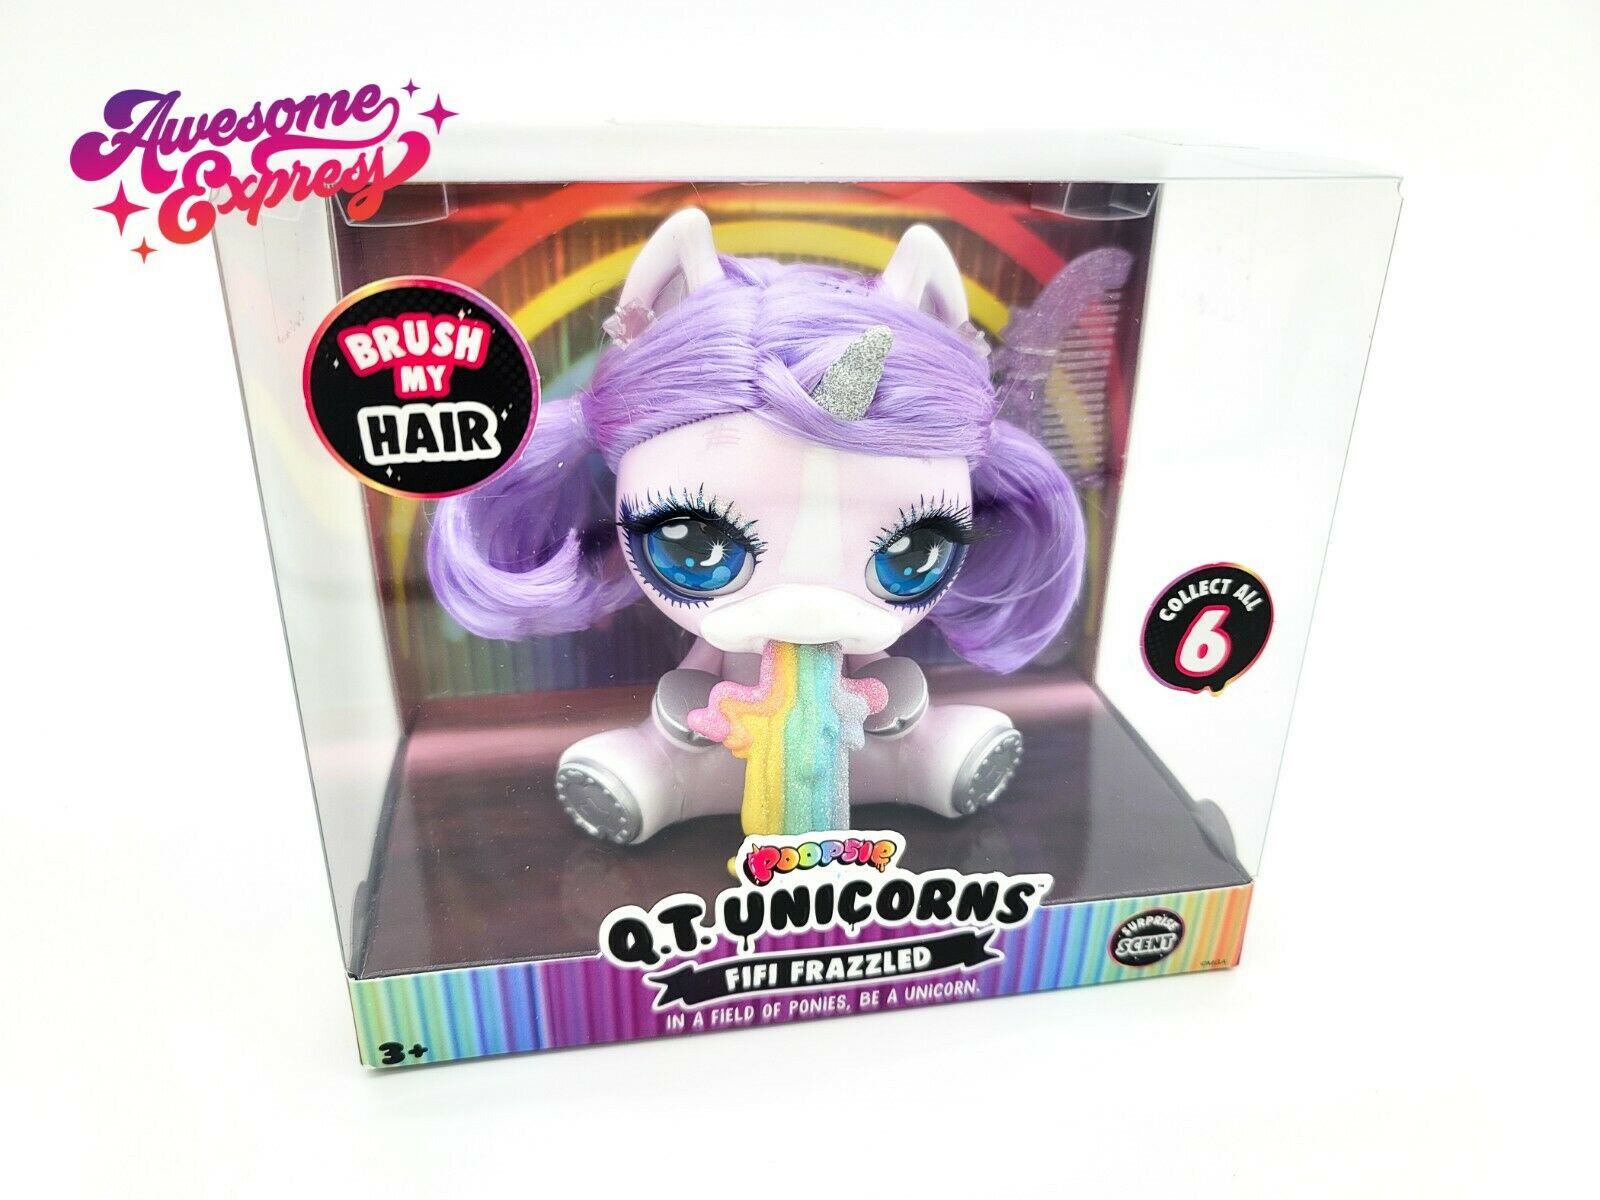 Poopsie Qt Unicorns Fifi Frazzled Doll Brand New Surprise Scent Brushable Hair